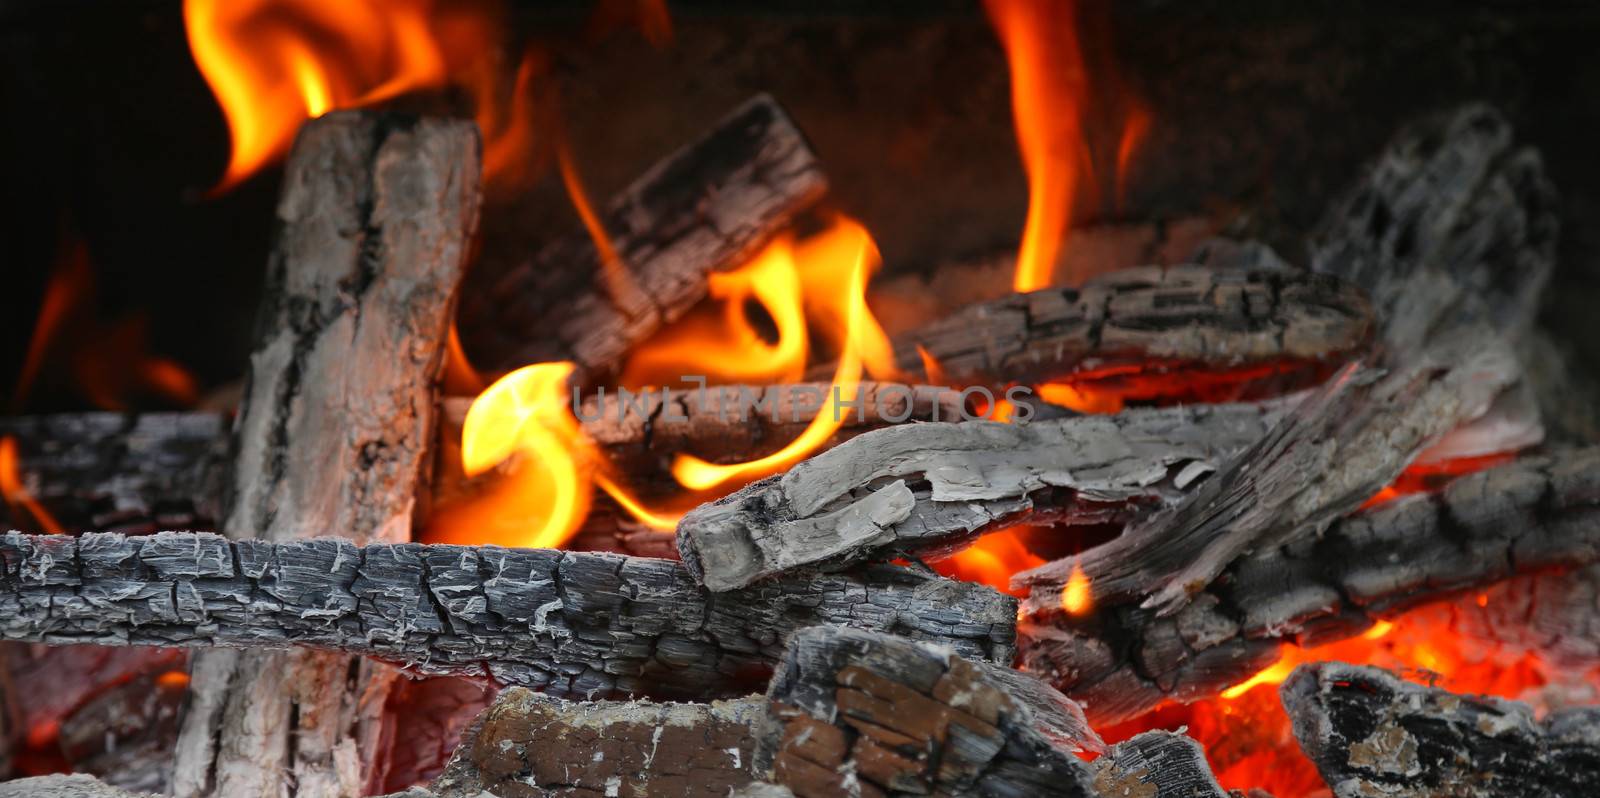 fireplace with coals burning down. whole background